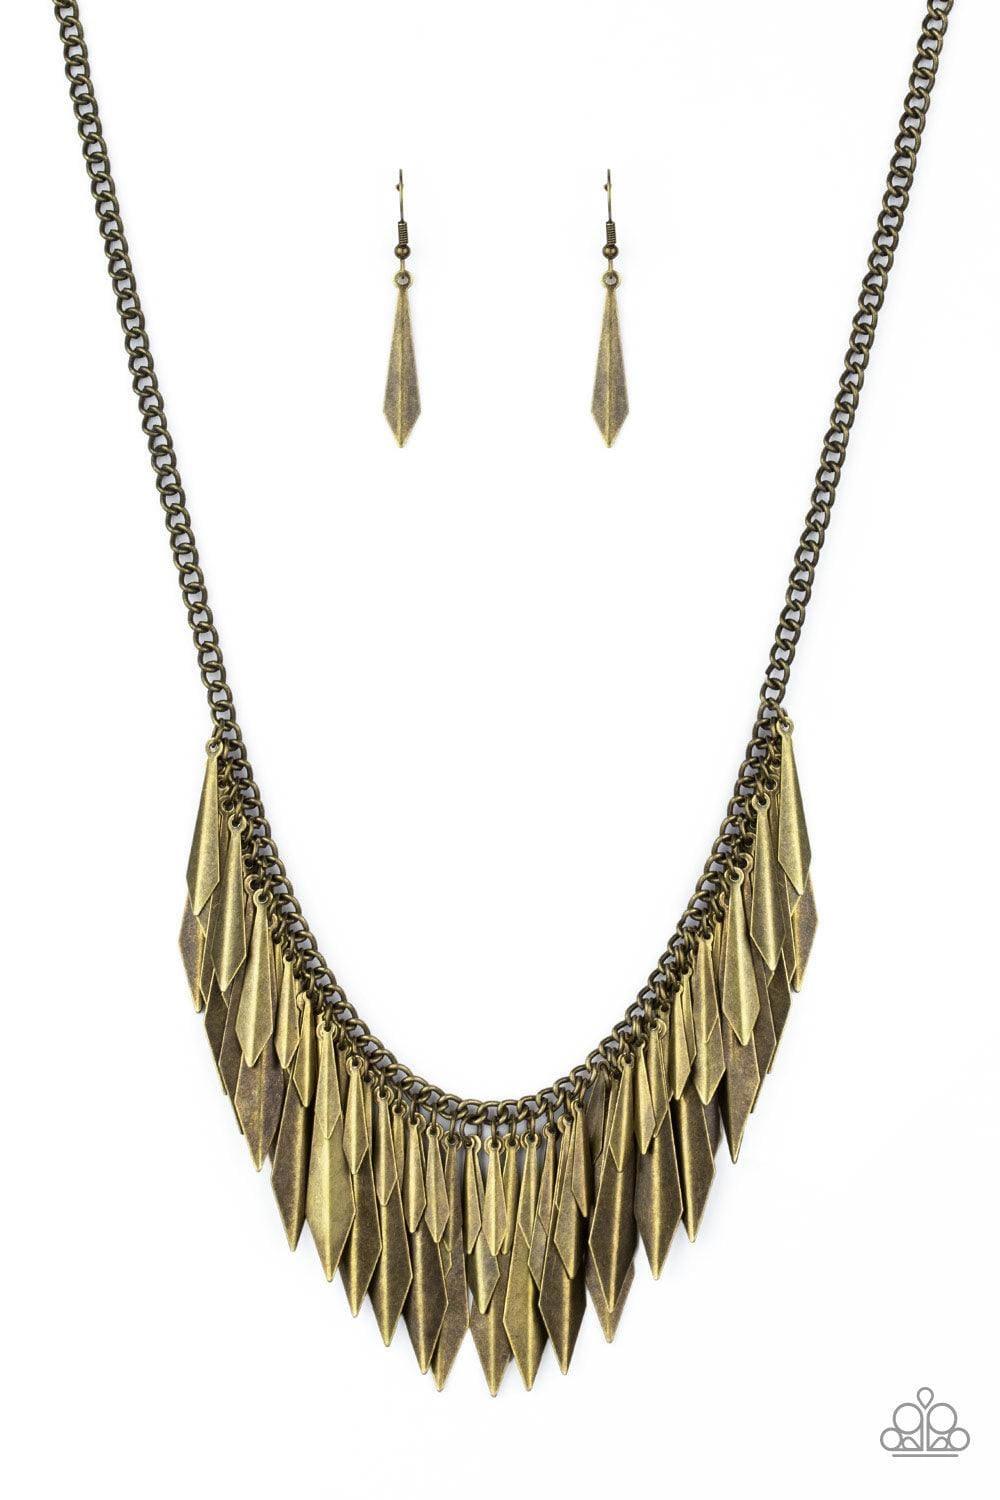 Paparazzi Accessories - The Thrill-seeker - Brass Necklace - Bling by JessieK